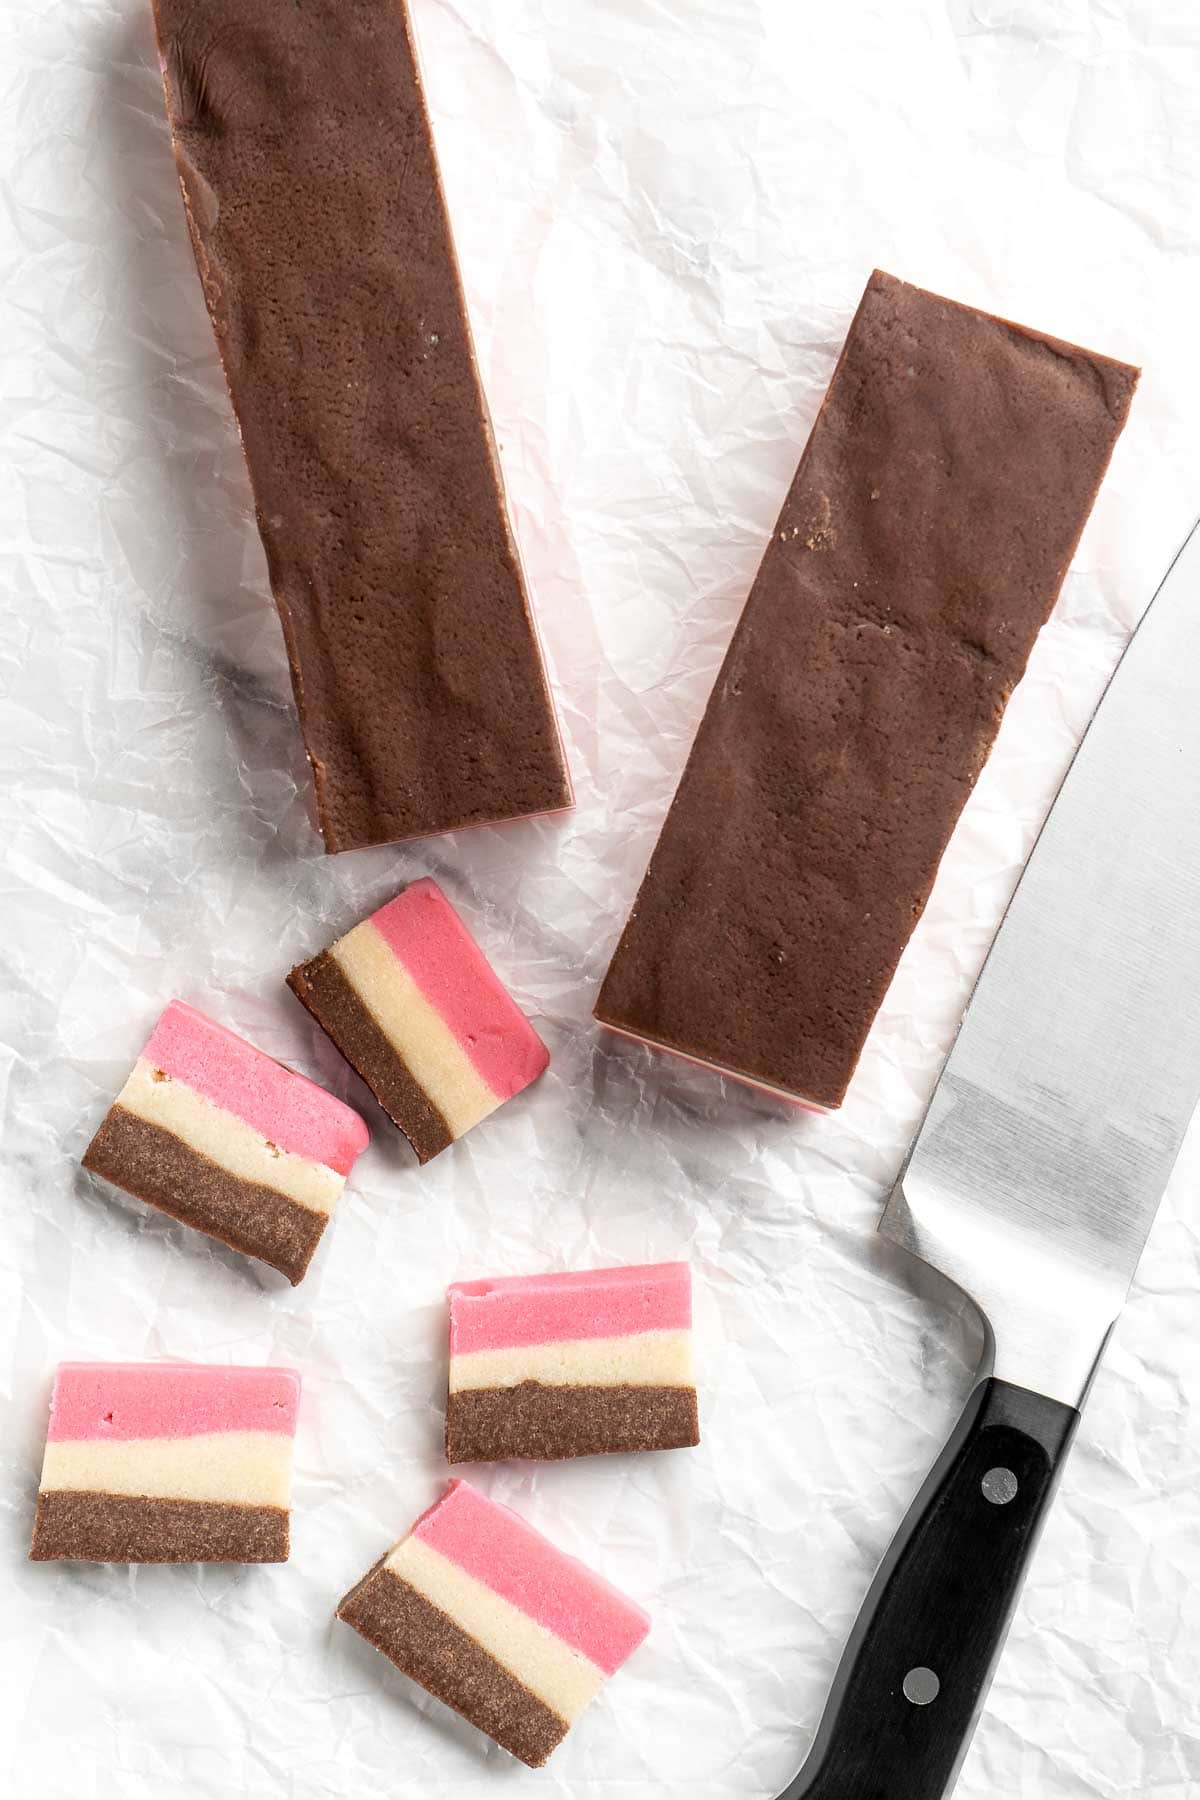 With their iconic pink, brown, and white stripes, these homemade Neapolitan Cookies are both beautiful and delicious. Made with 3 flavors in one dough! | aheadofthyme.com